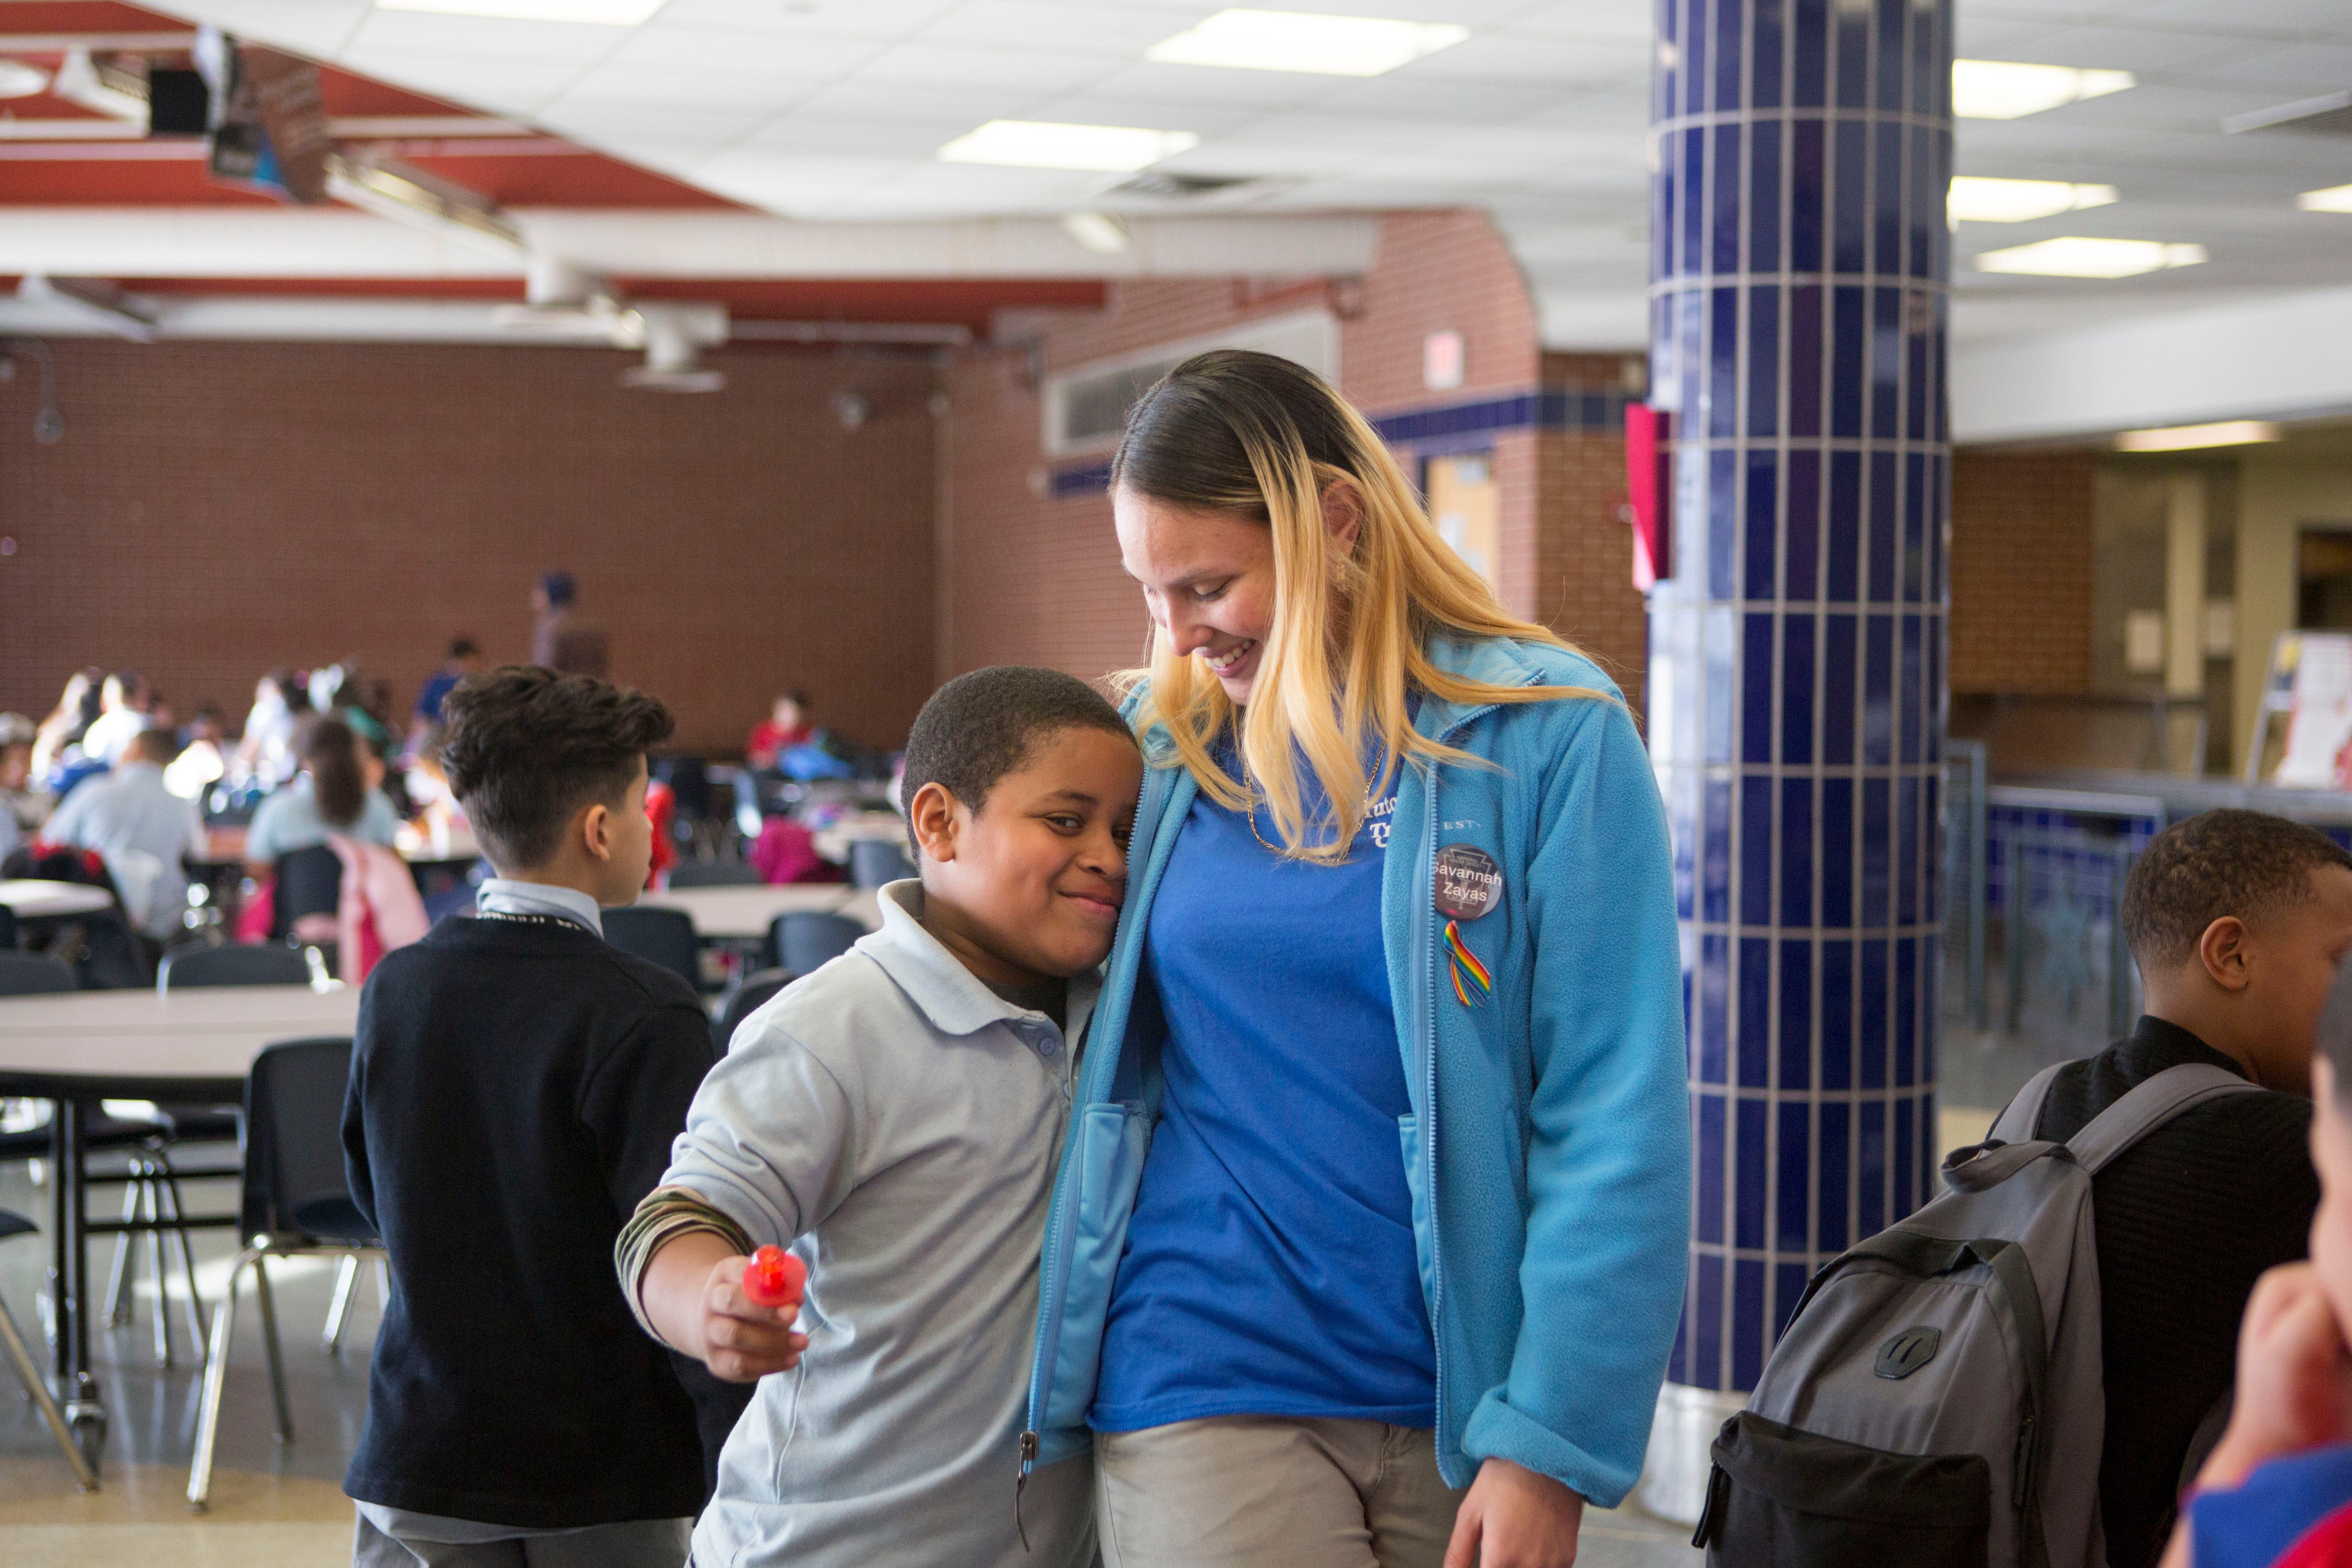 </b> Savannah, in her role as a teen leader in The Providence Center’s after school program, hugs an elementary school student. (Jessica Kourkounis/For Keystone Crossroads) 